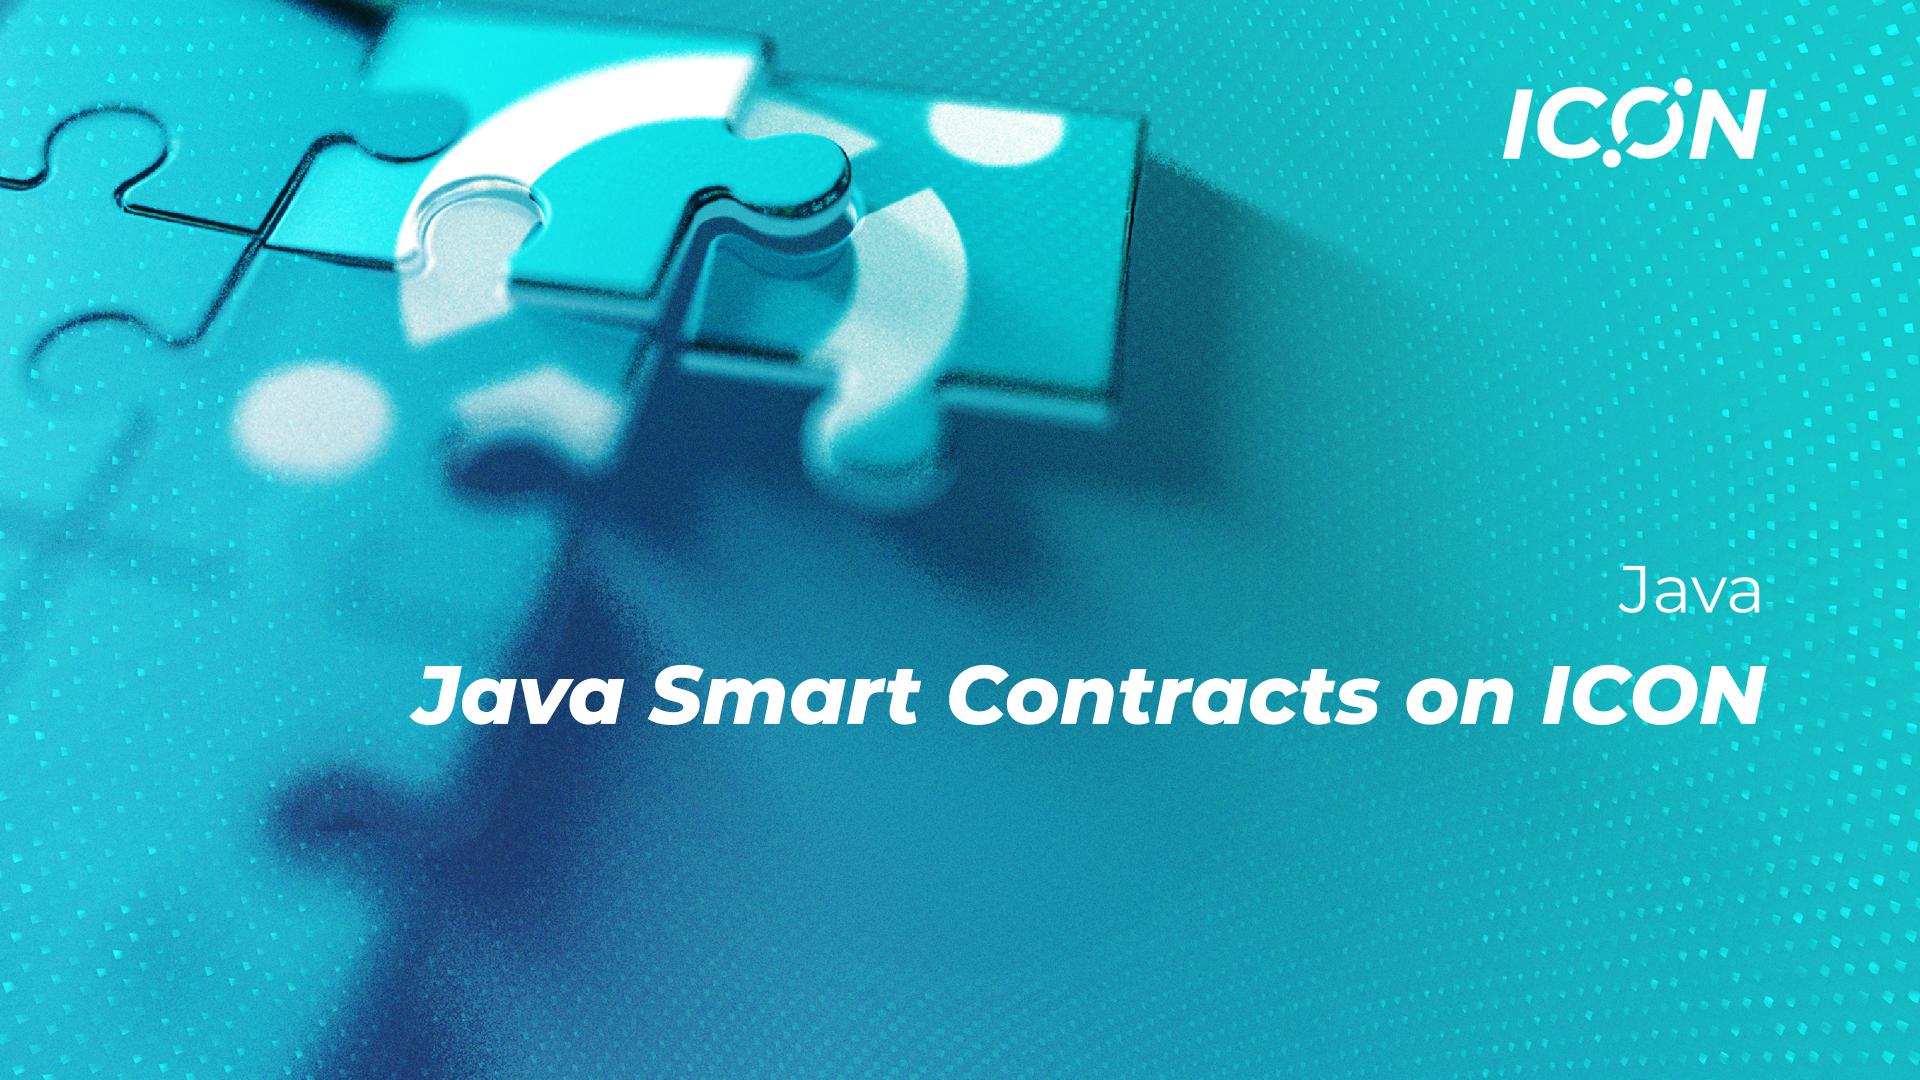 Java tutorial series part 1 How to setup the development environment and writing smart contracts